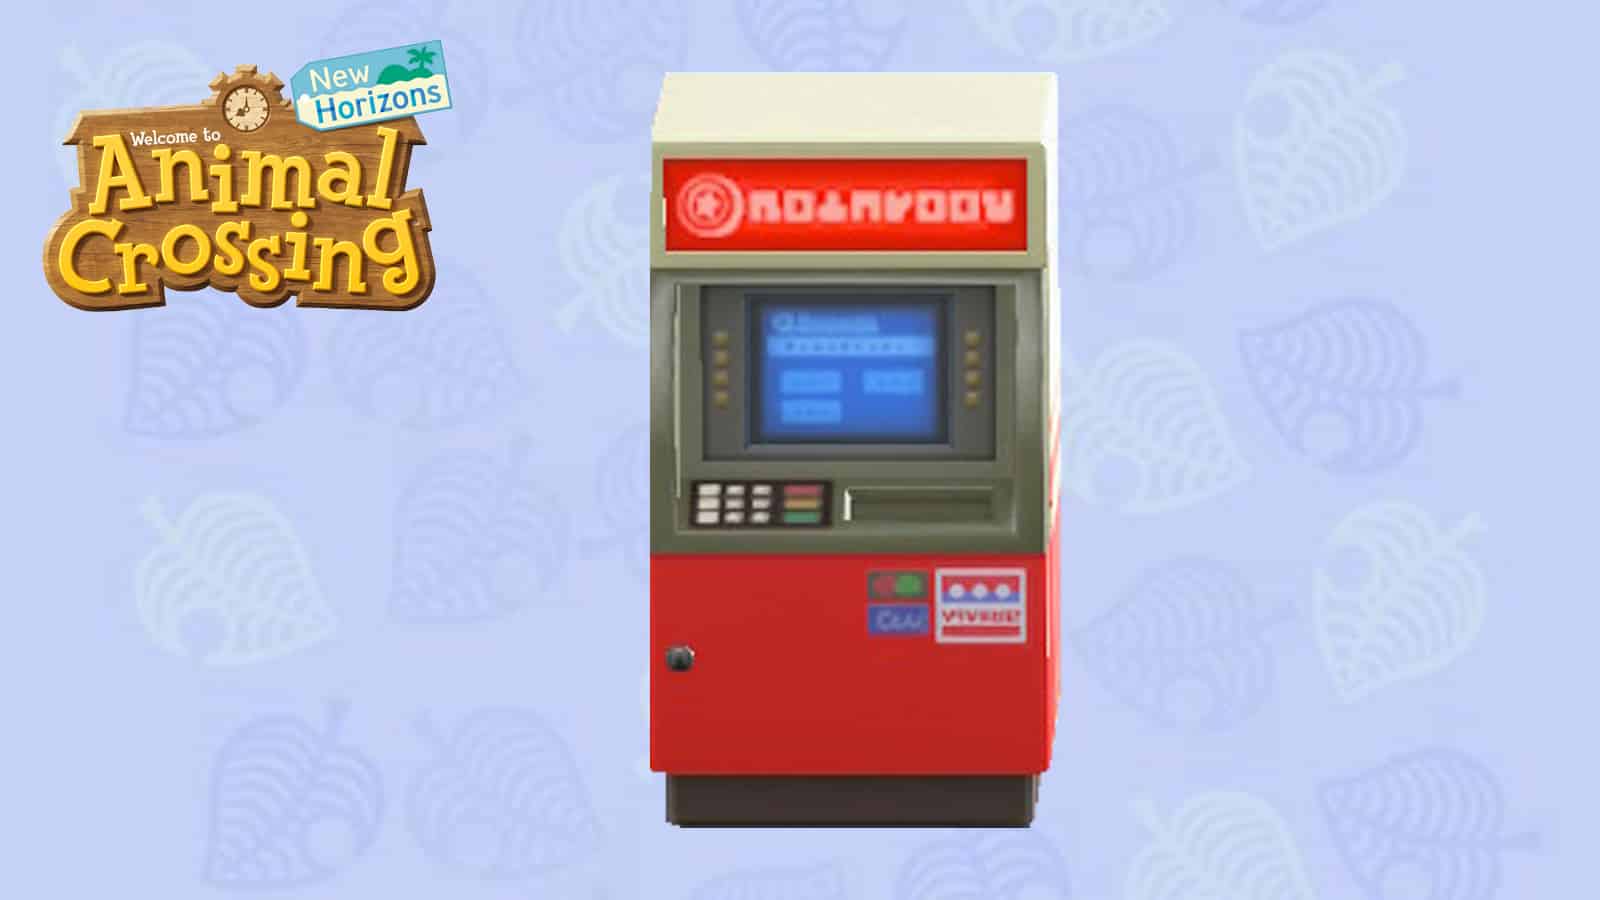 An ABD machine in Animal Crossing